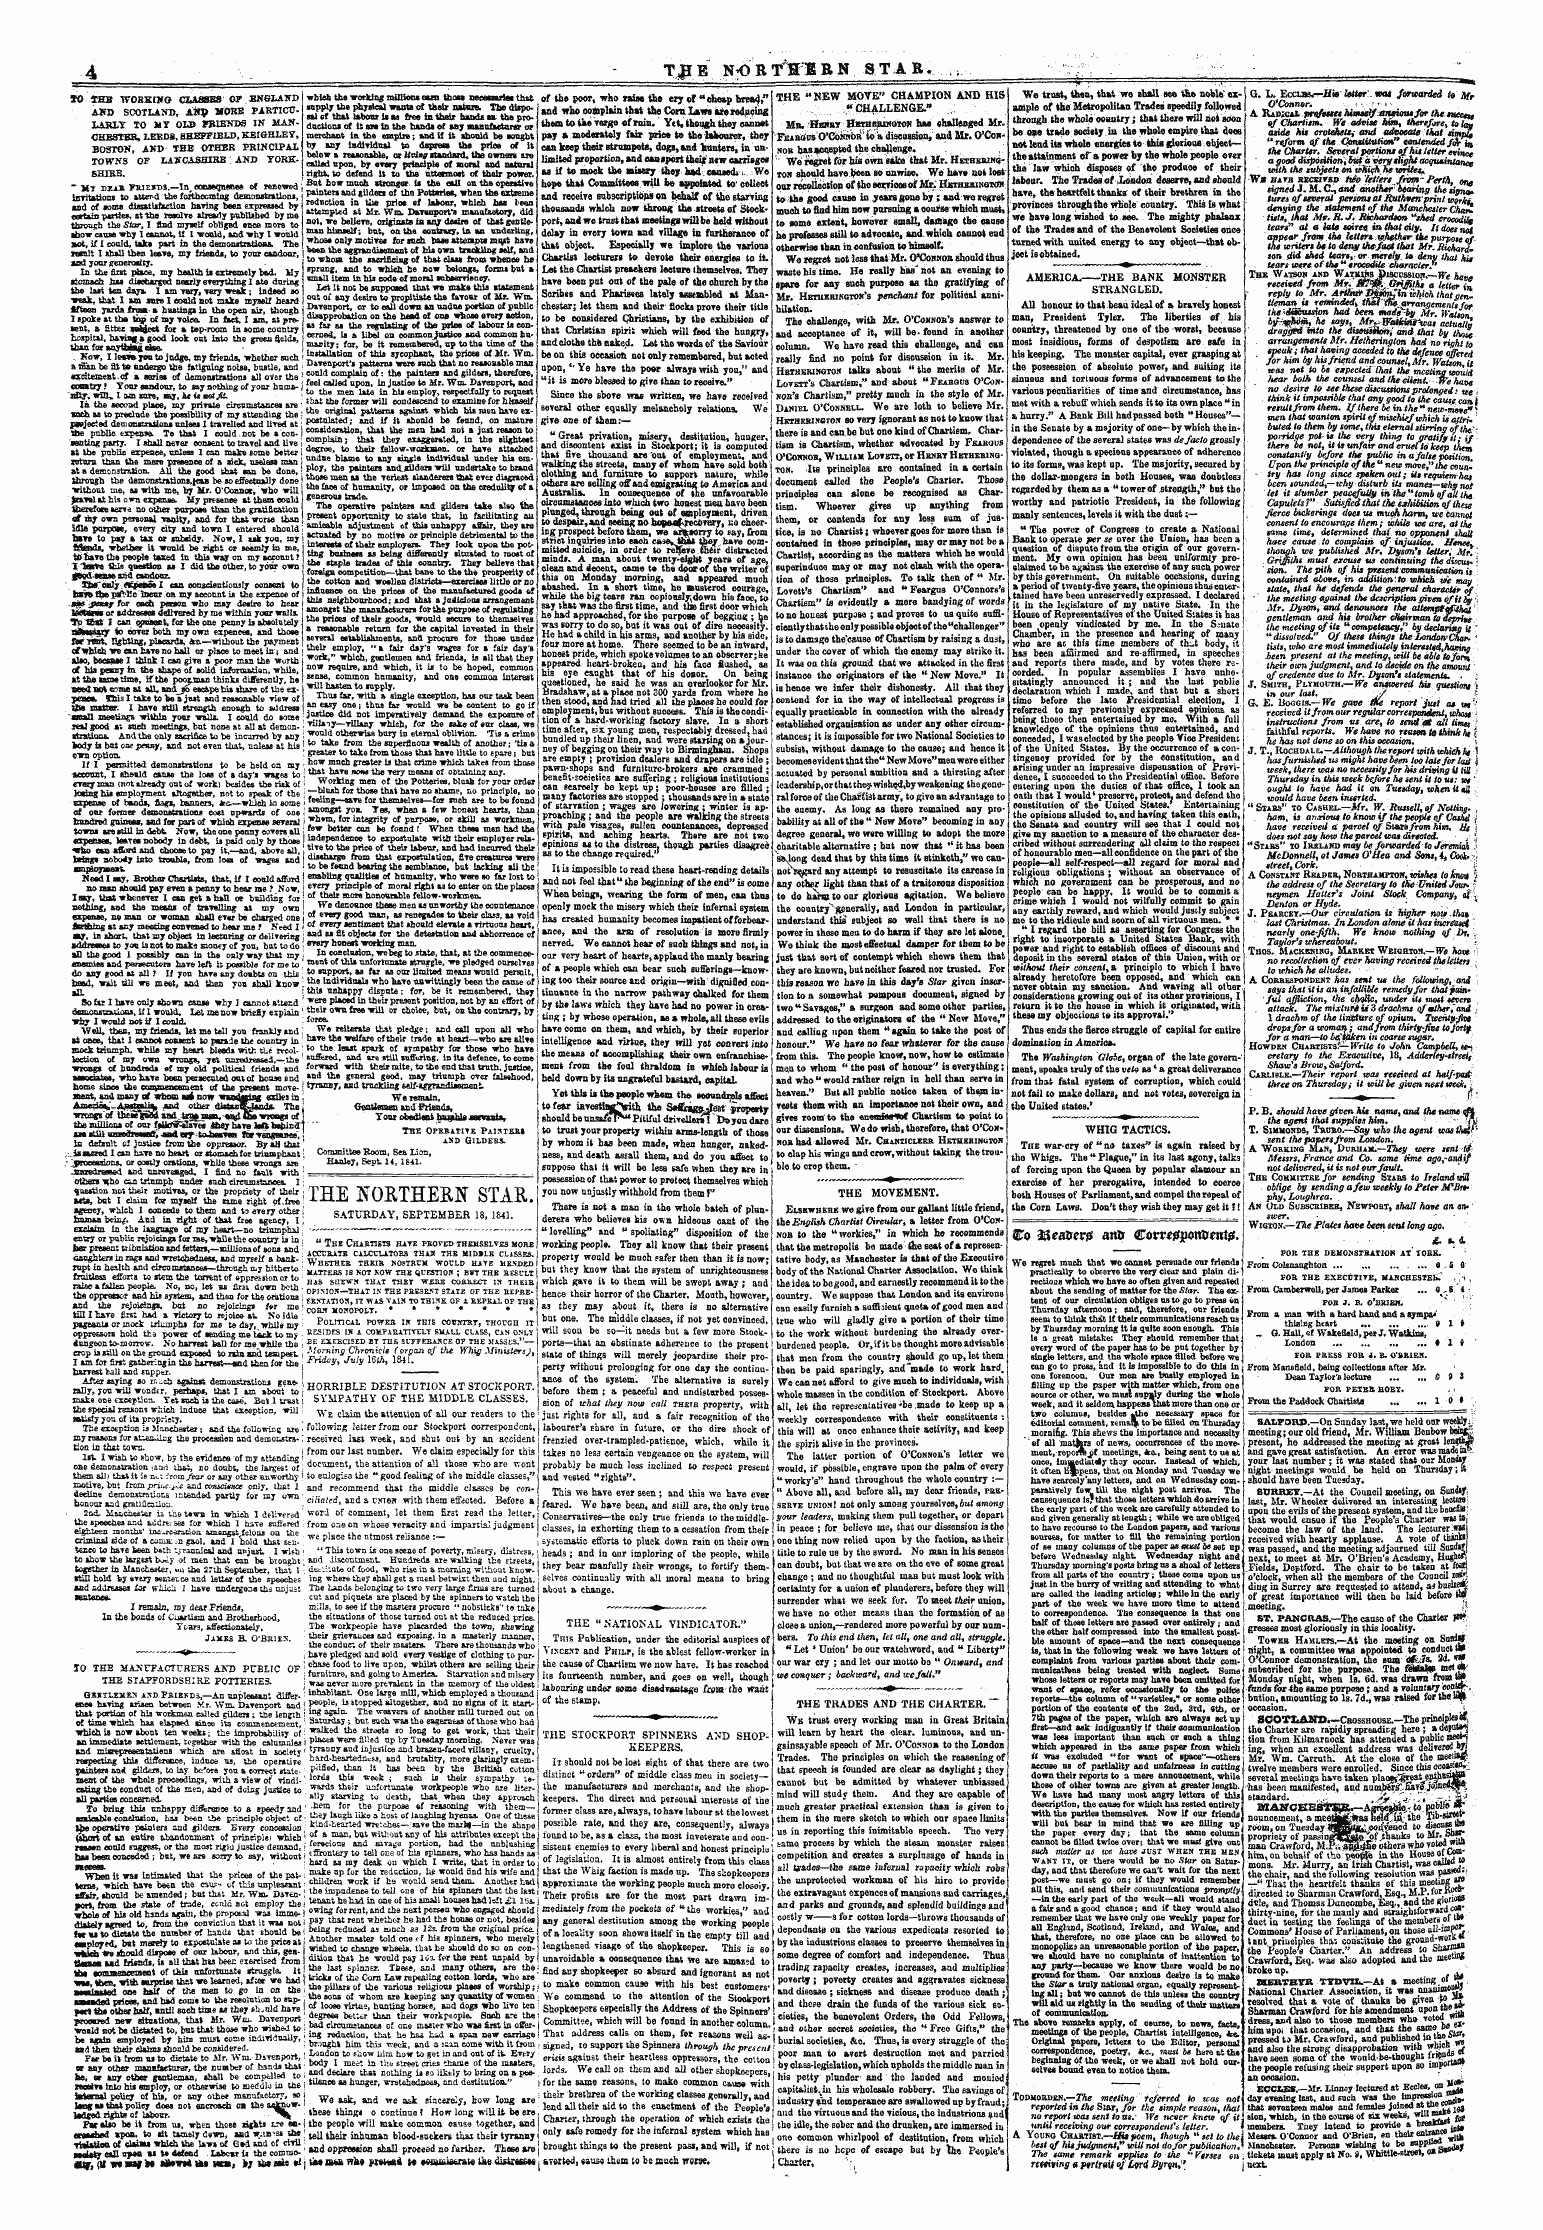 Northern Star (1837-1852): jS F Y, 3rd edition - The Northern Star Saturday, September 18, 1841.